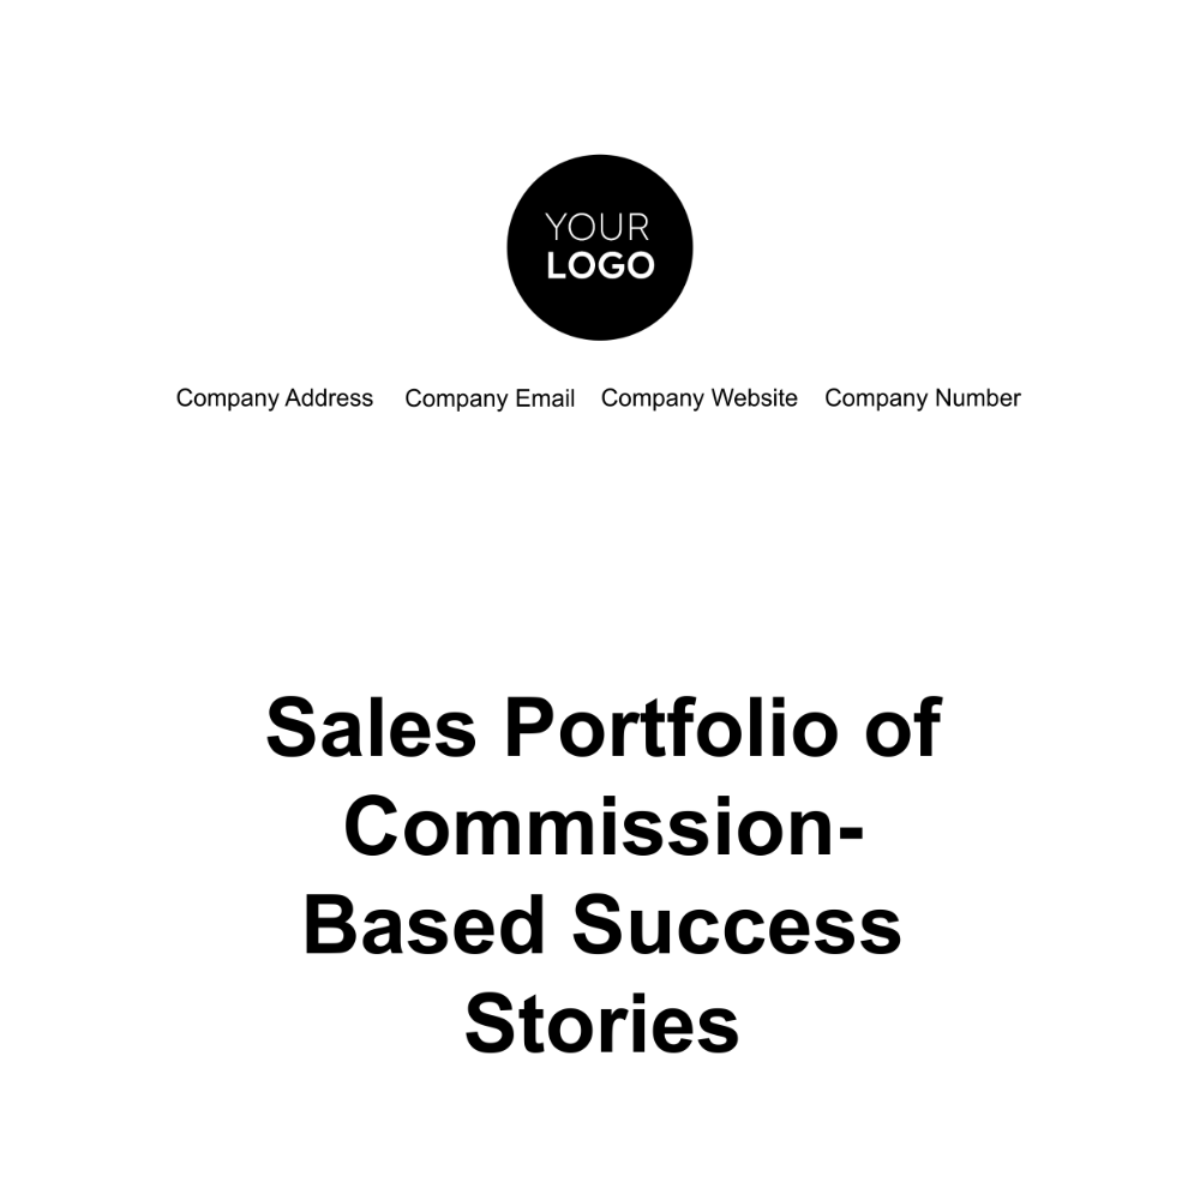 Free Sales Portfolio of Commission-Based Success Stories Template